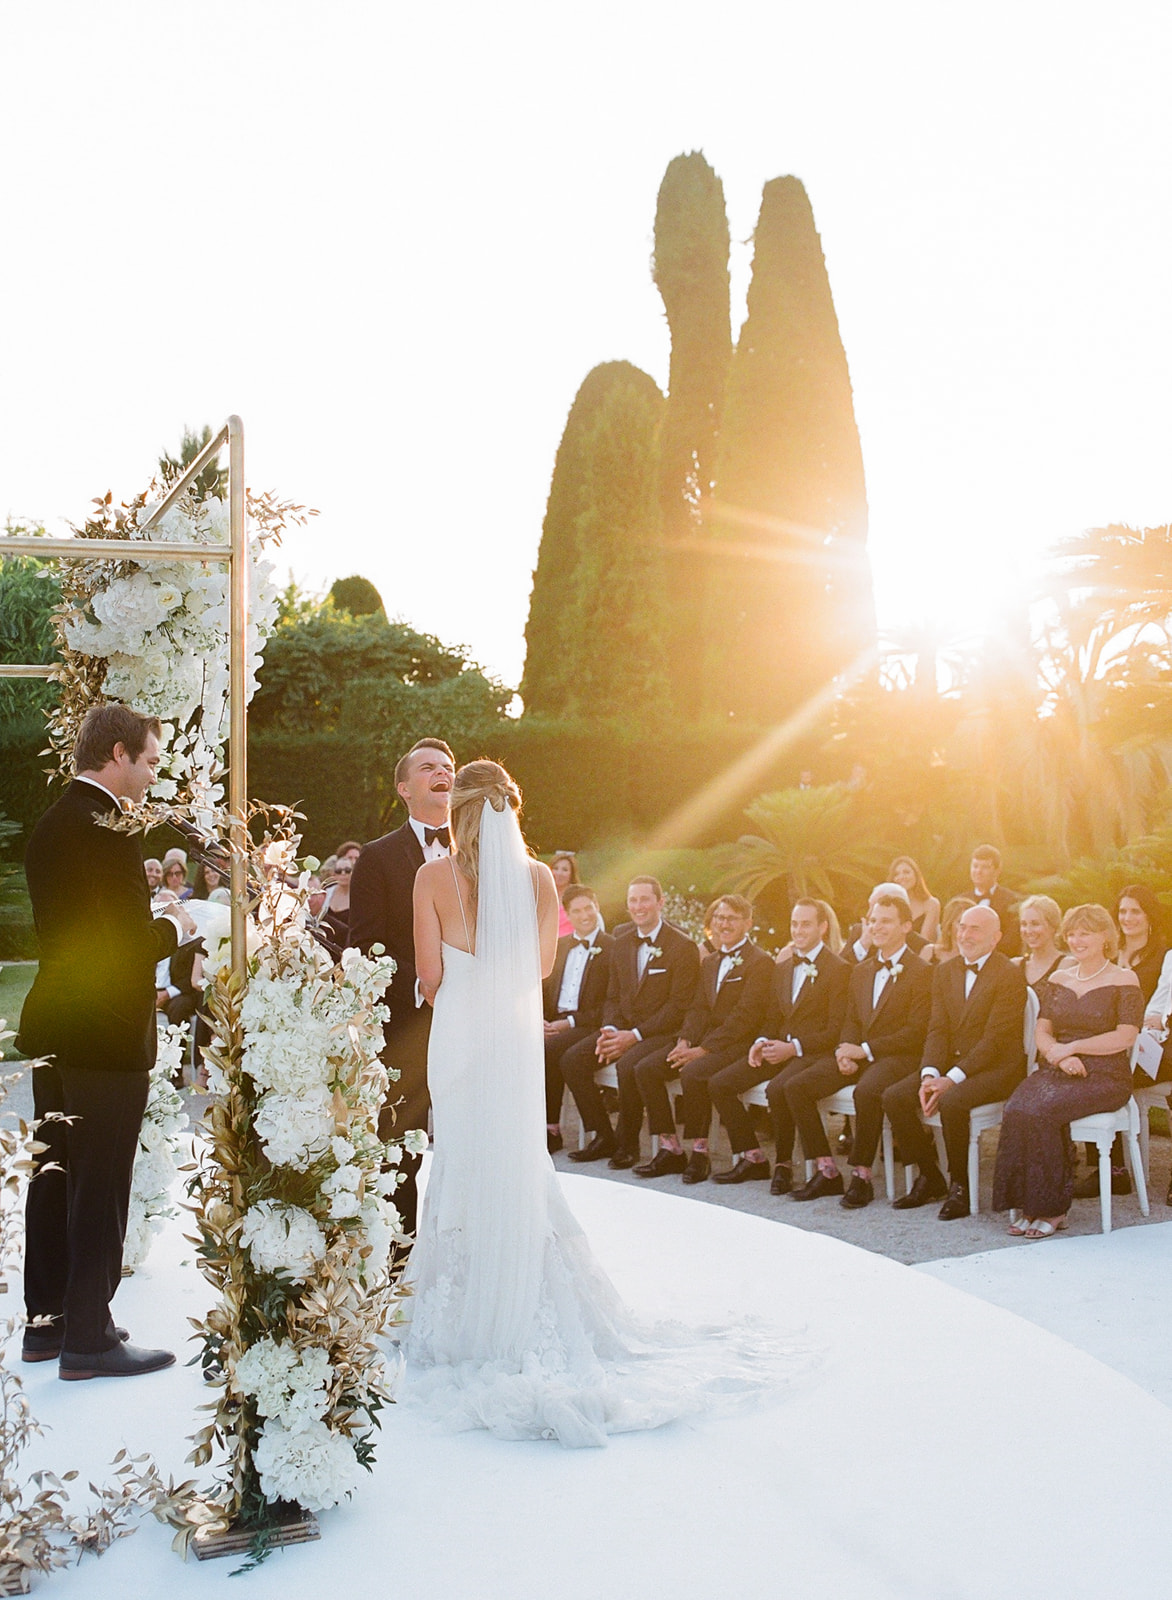 Annie and Ravean Beautiful Wedding in French Riviera